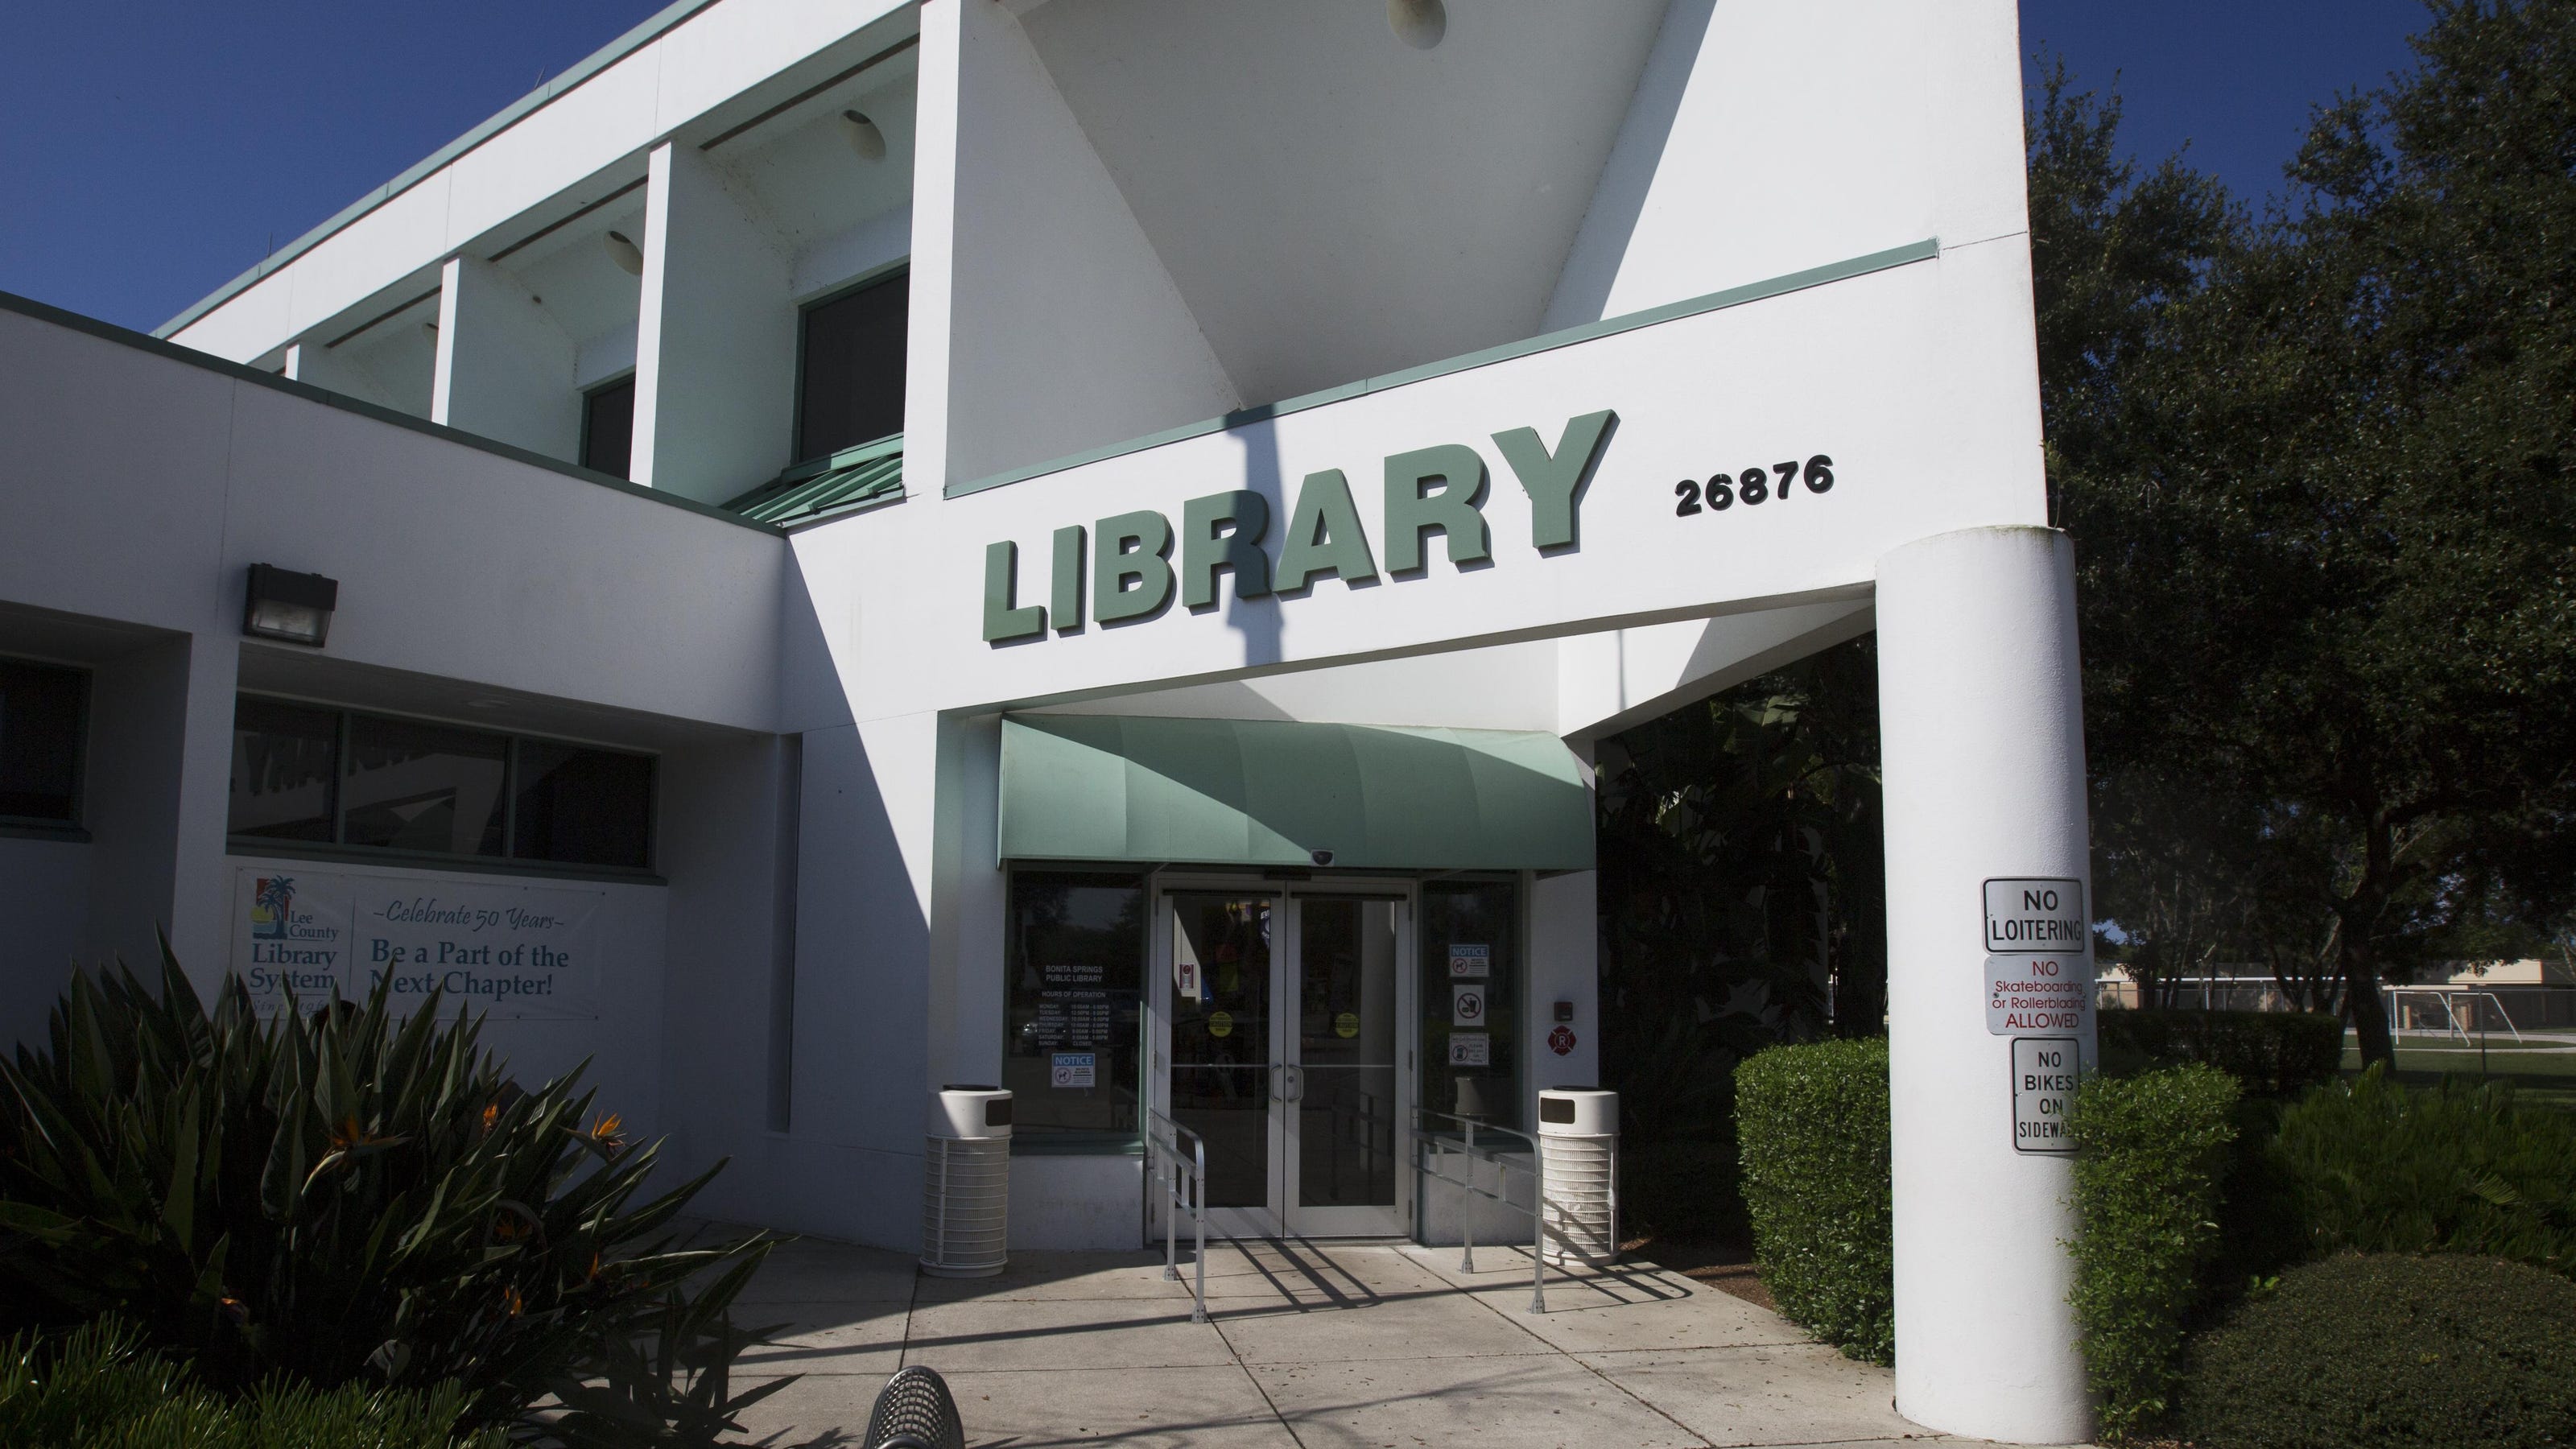 Lee County prepares to give old Bonita Springs library to city